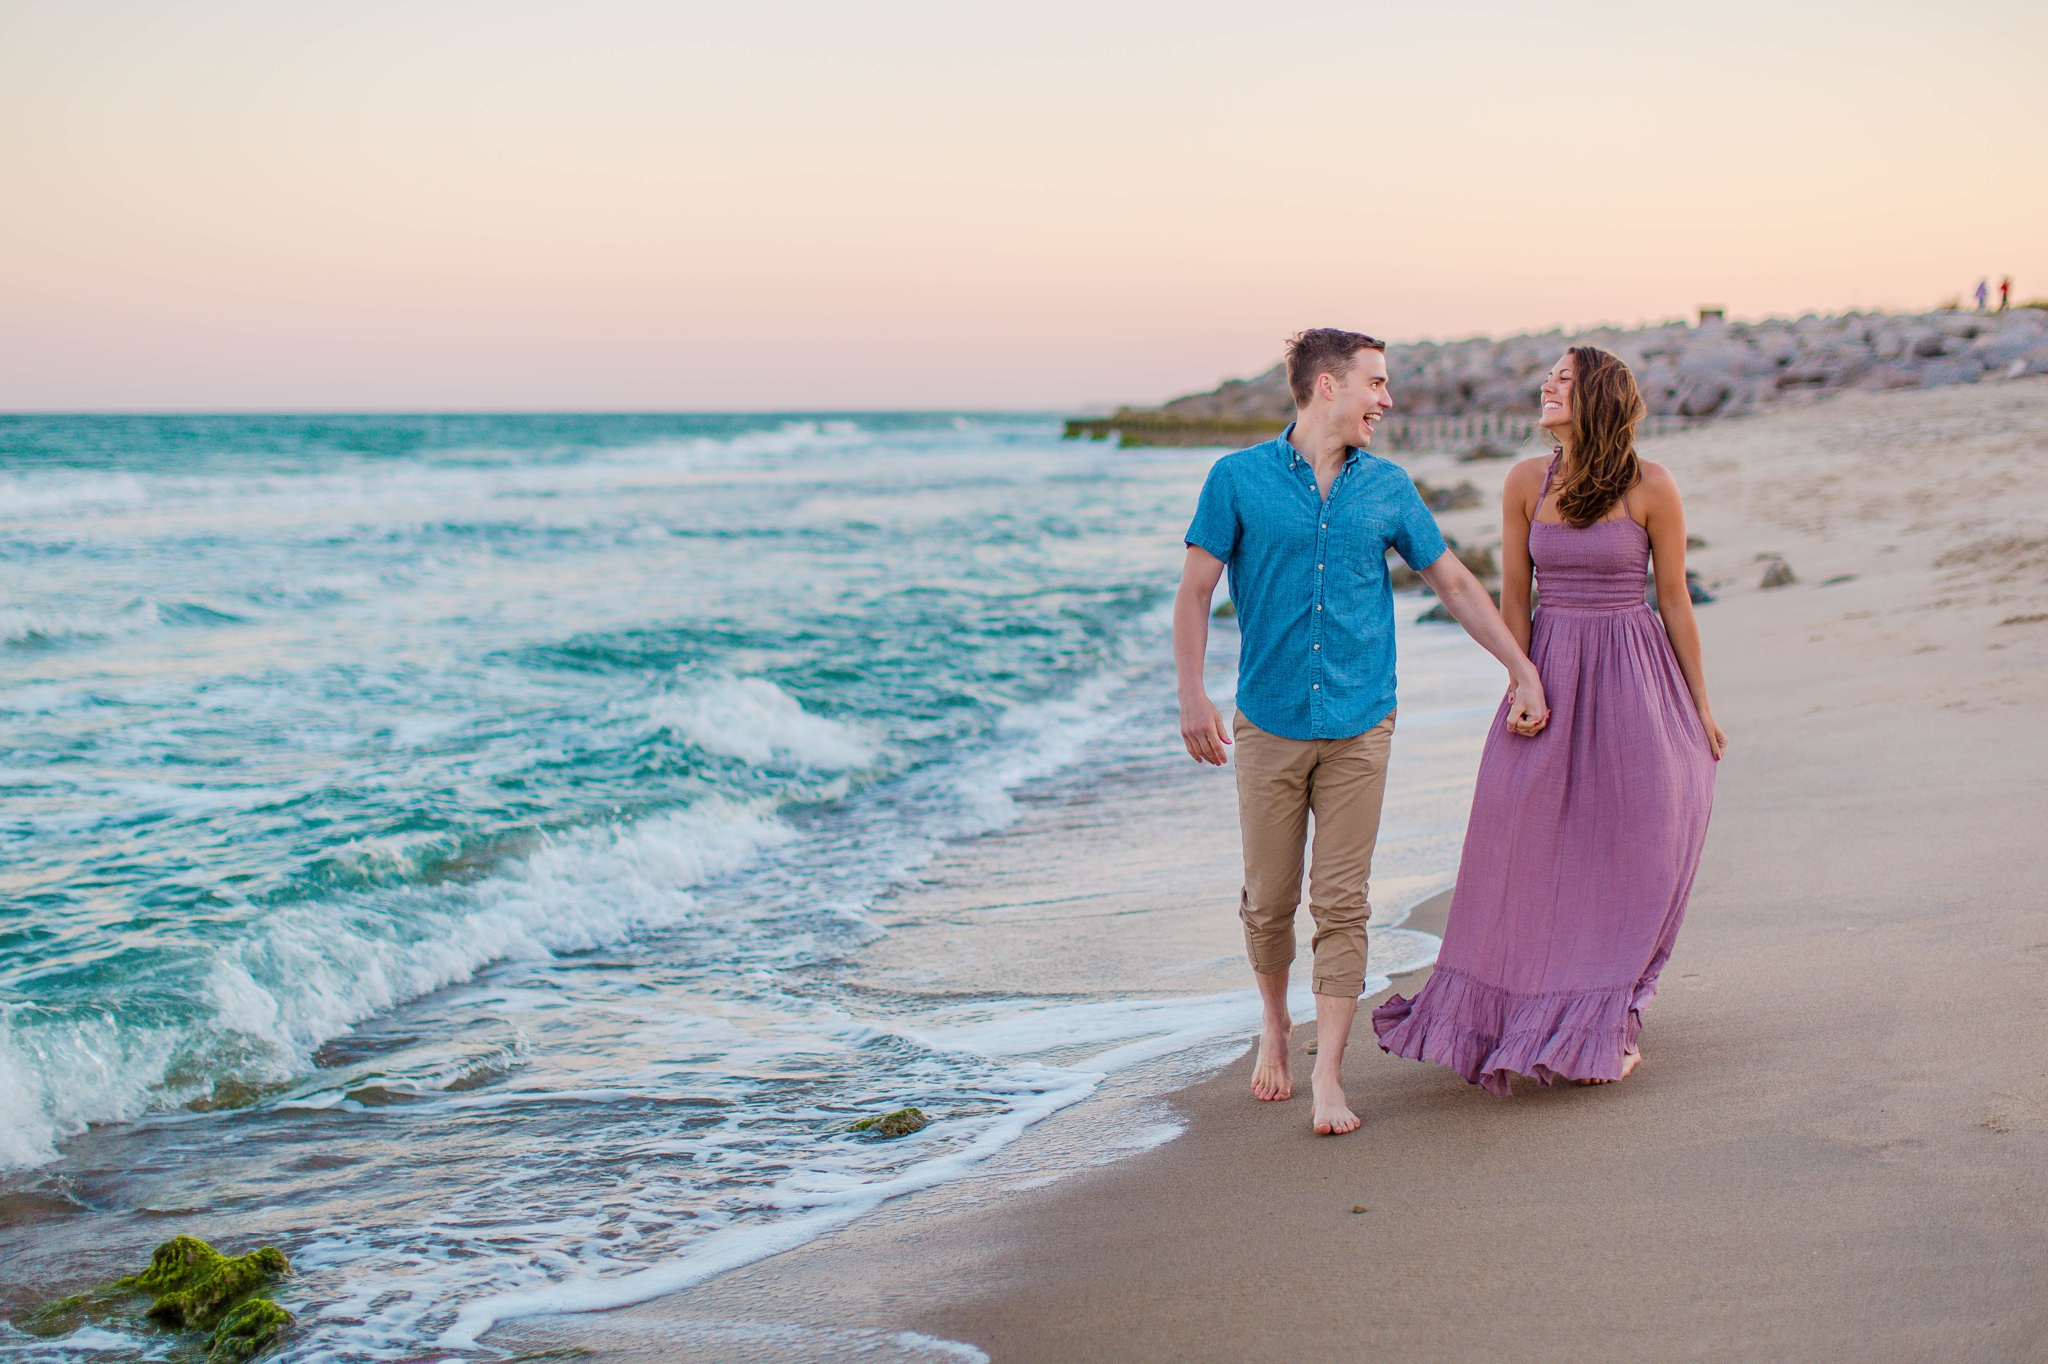  GUY AND his fiance walking in the water - - Woman is in a flowy pastel maxi dress - candid and unposed golden light session - beach engagement photographer in honolulu, oahu, hawaii - johanna dye photography 